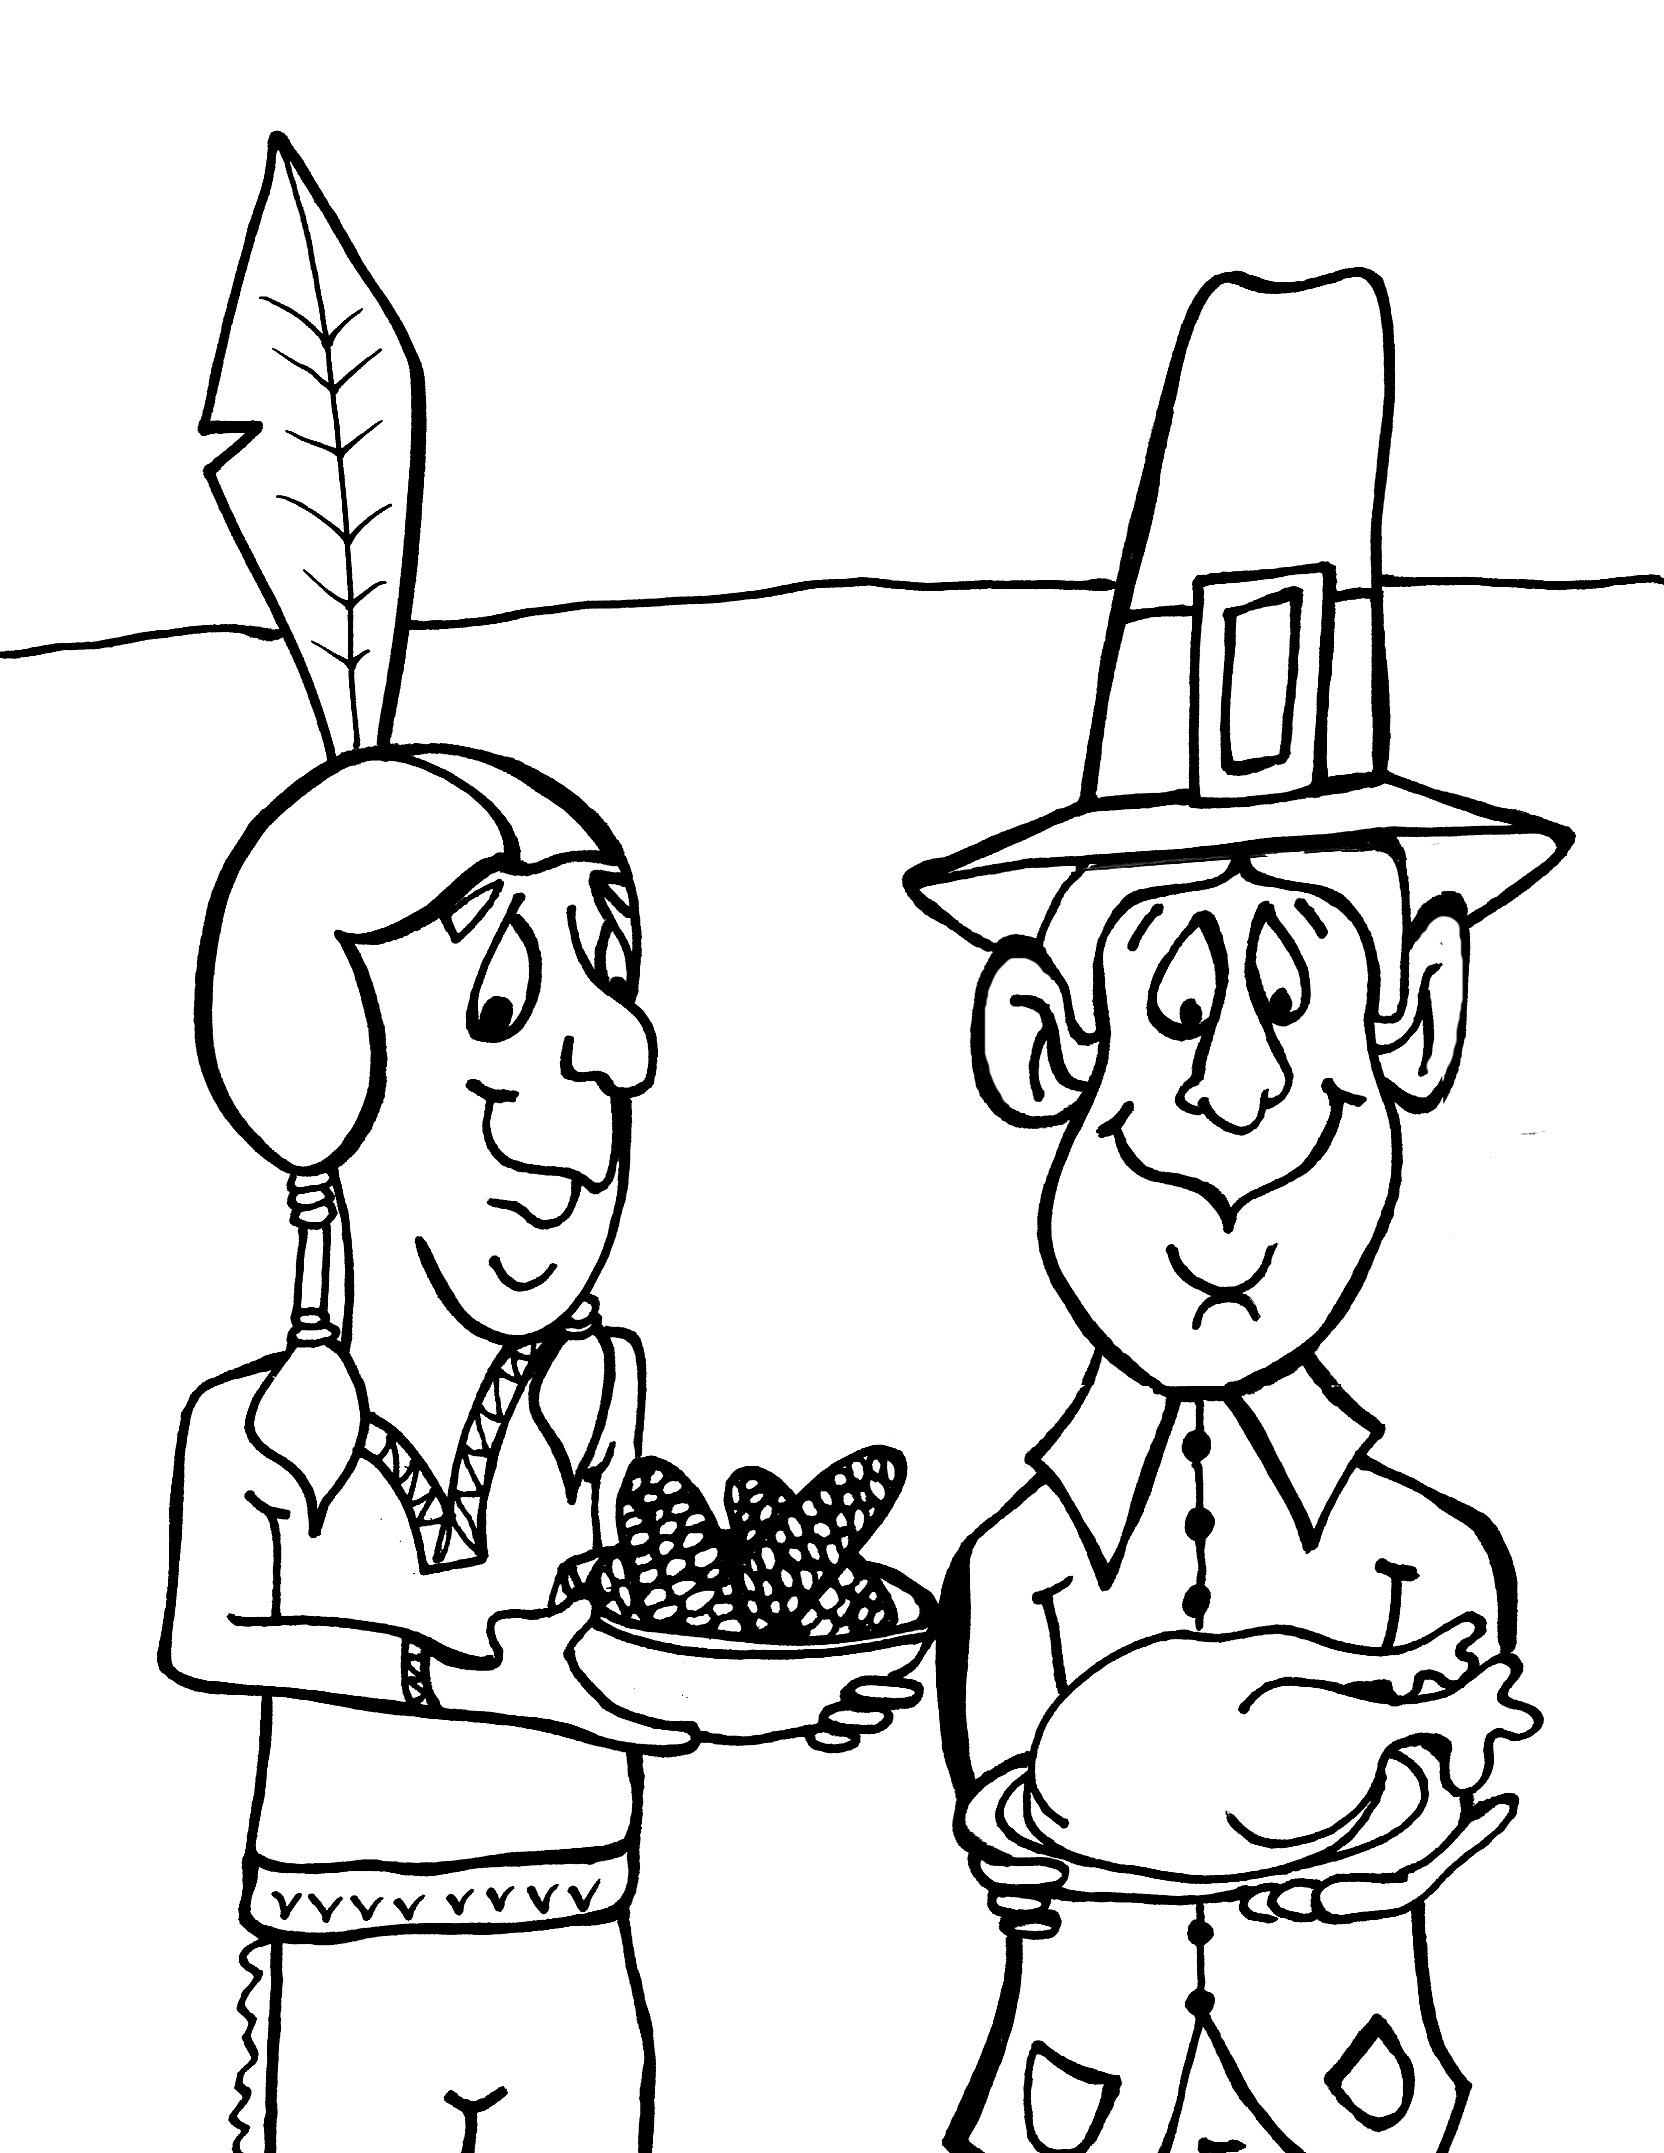 Free Printable Images For Thanksgiving